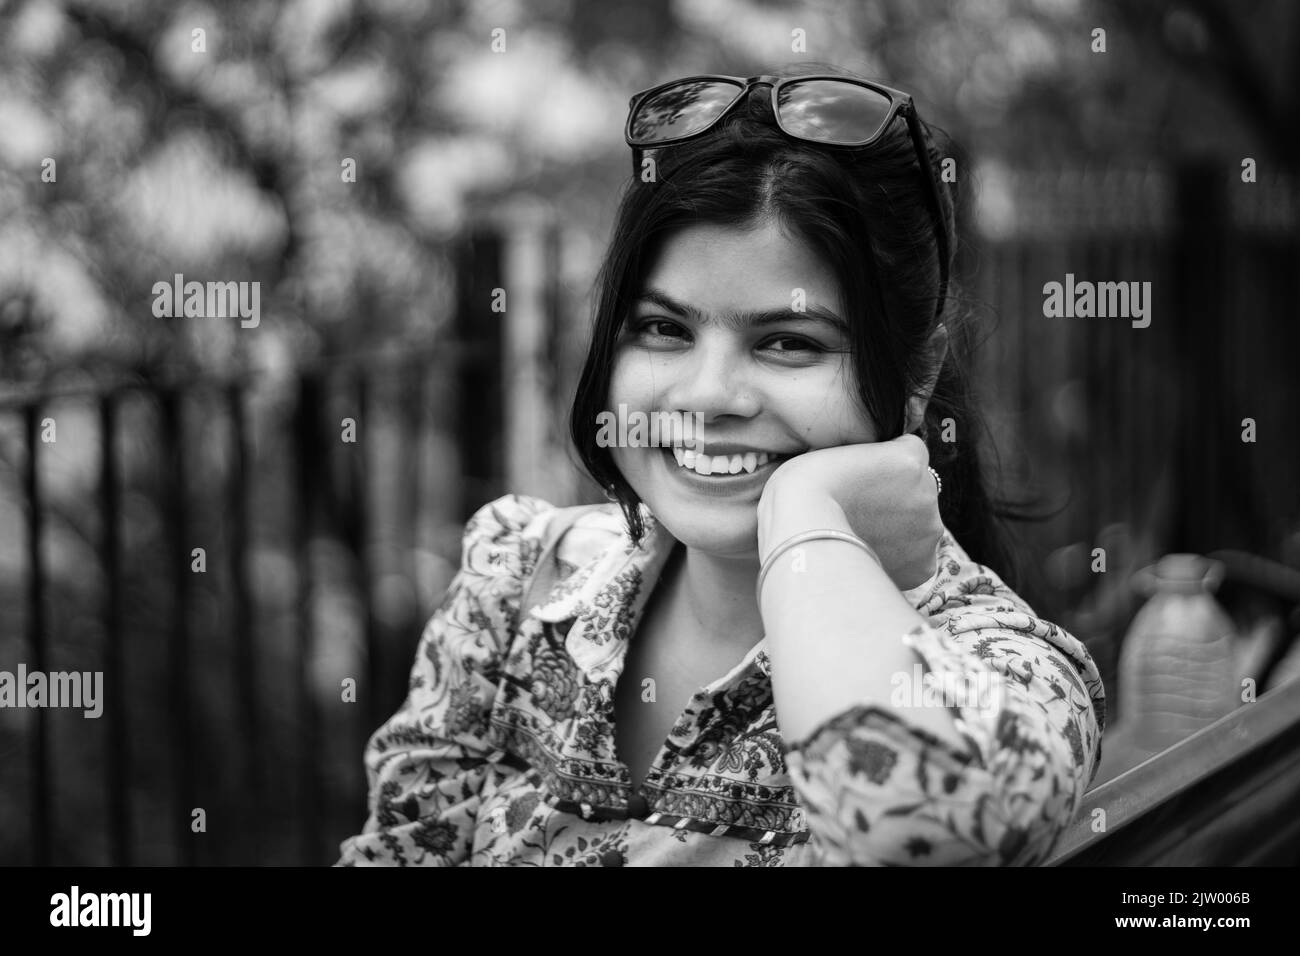 Black and white portrait of a pretty Indian woman with sunglasses on head smiling and looking at camera Stock Photo